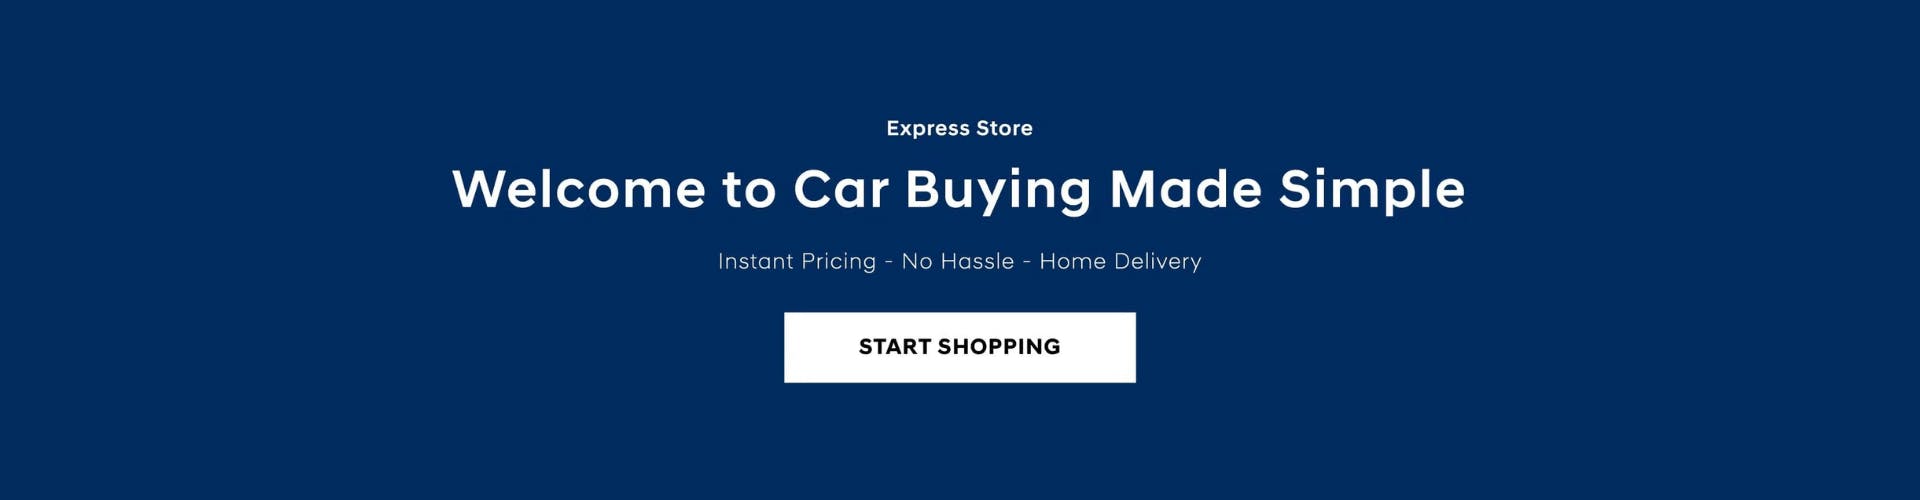 Express Store – Car Buying Made Easy